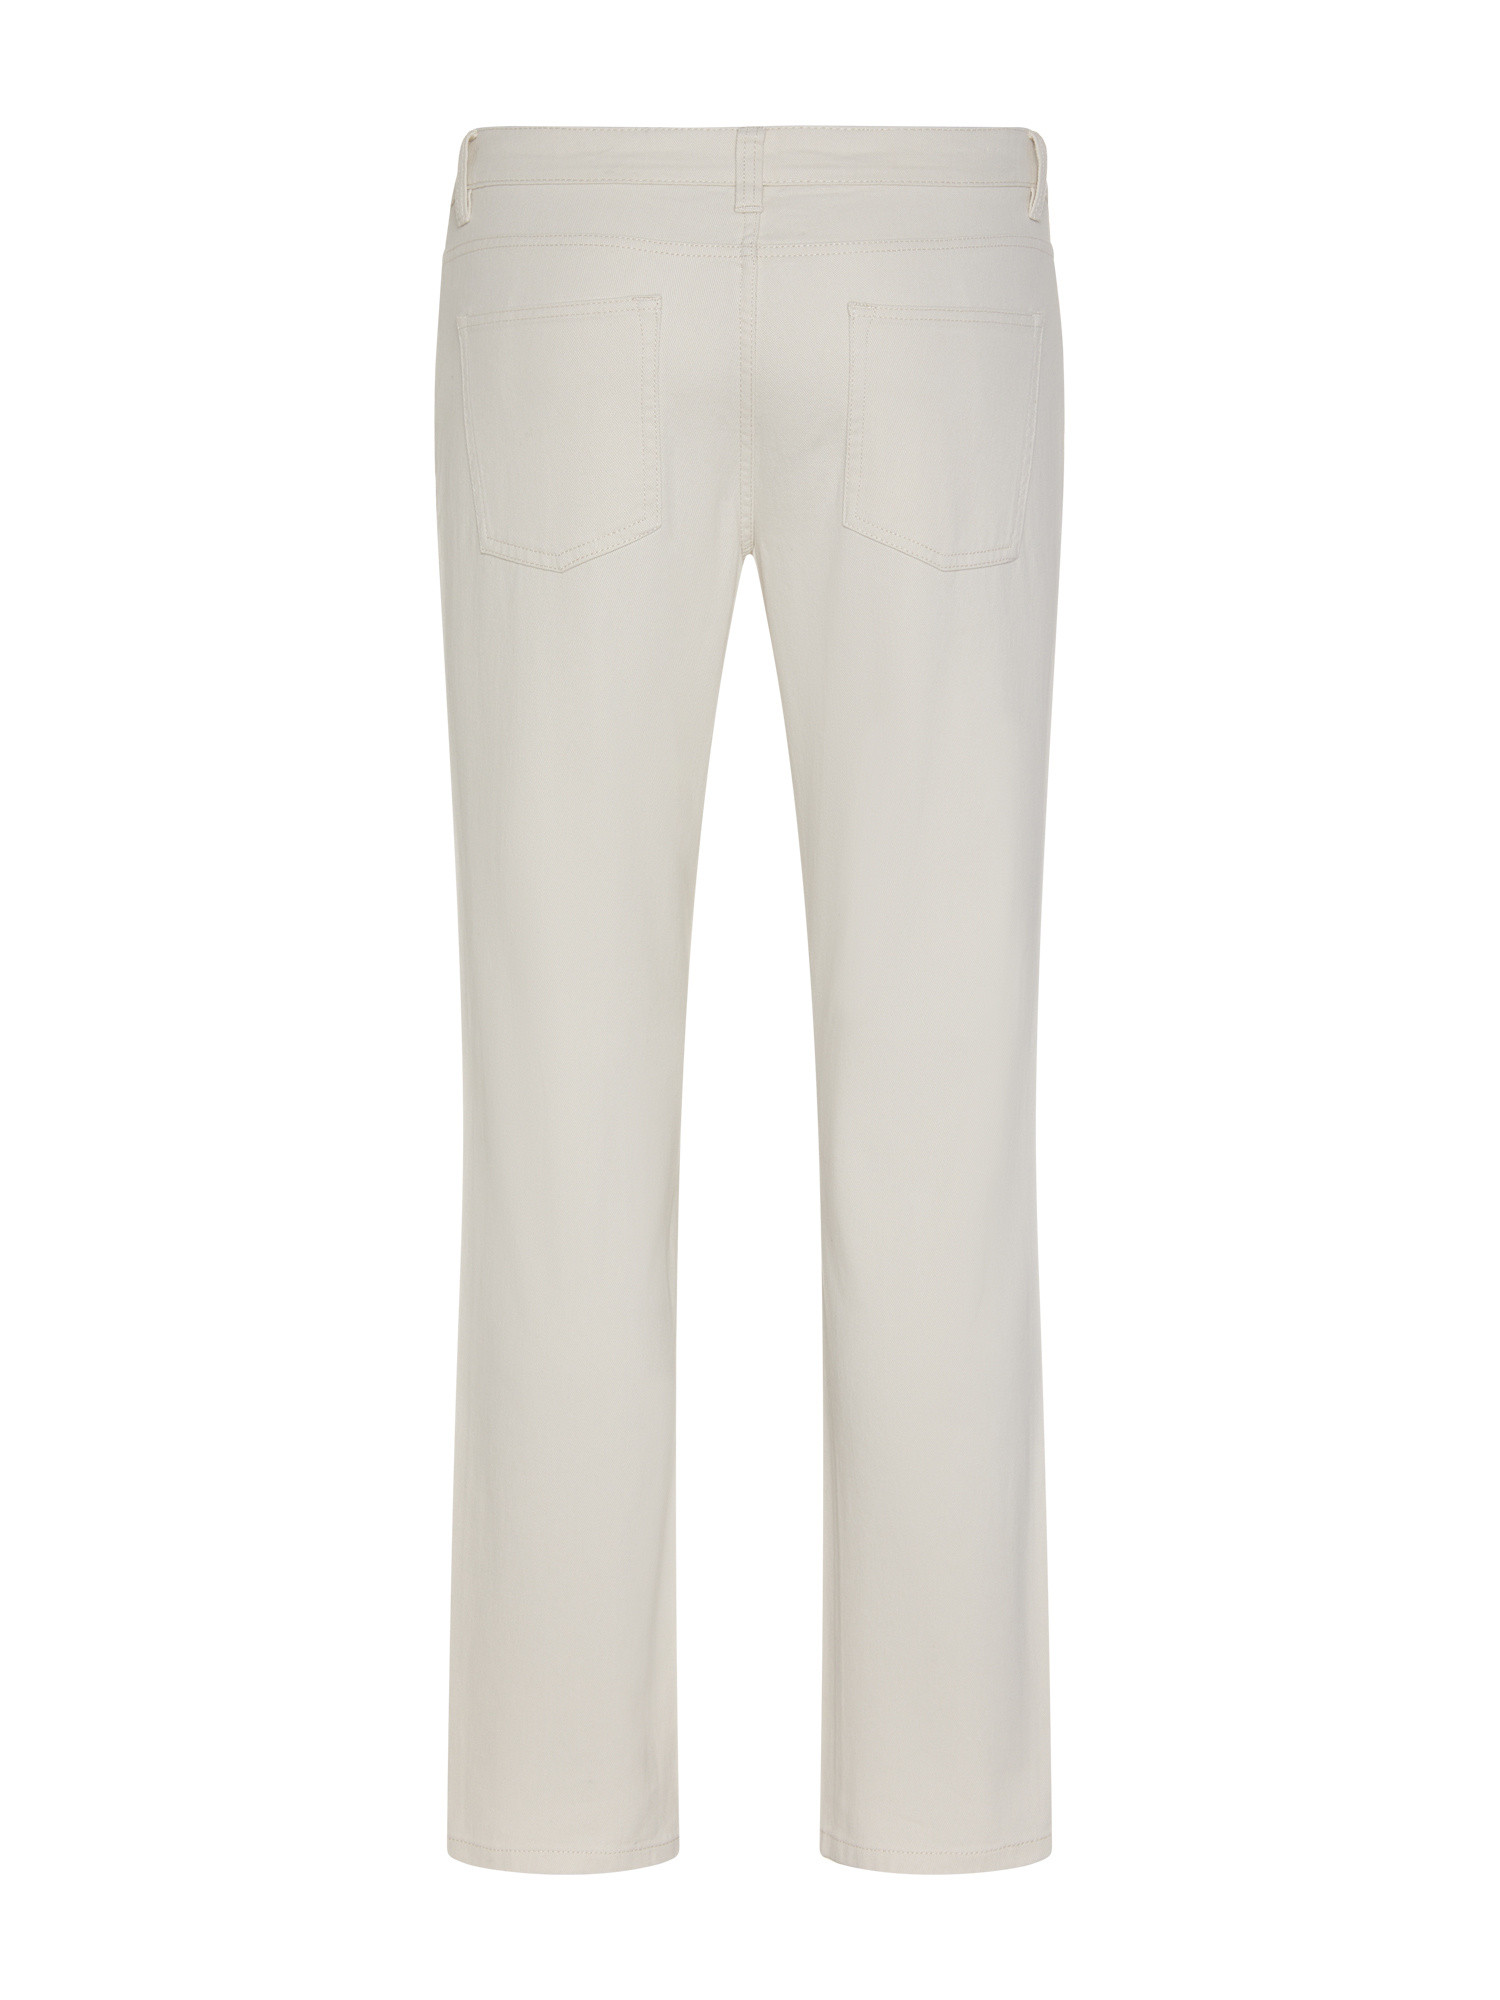 JCT - Regular fit five pocket trousers in pure cotton, White Cream, large image number 1